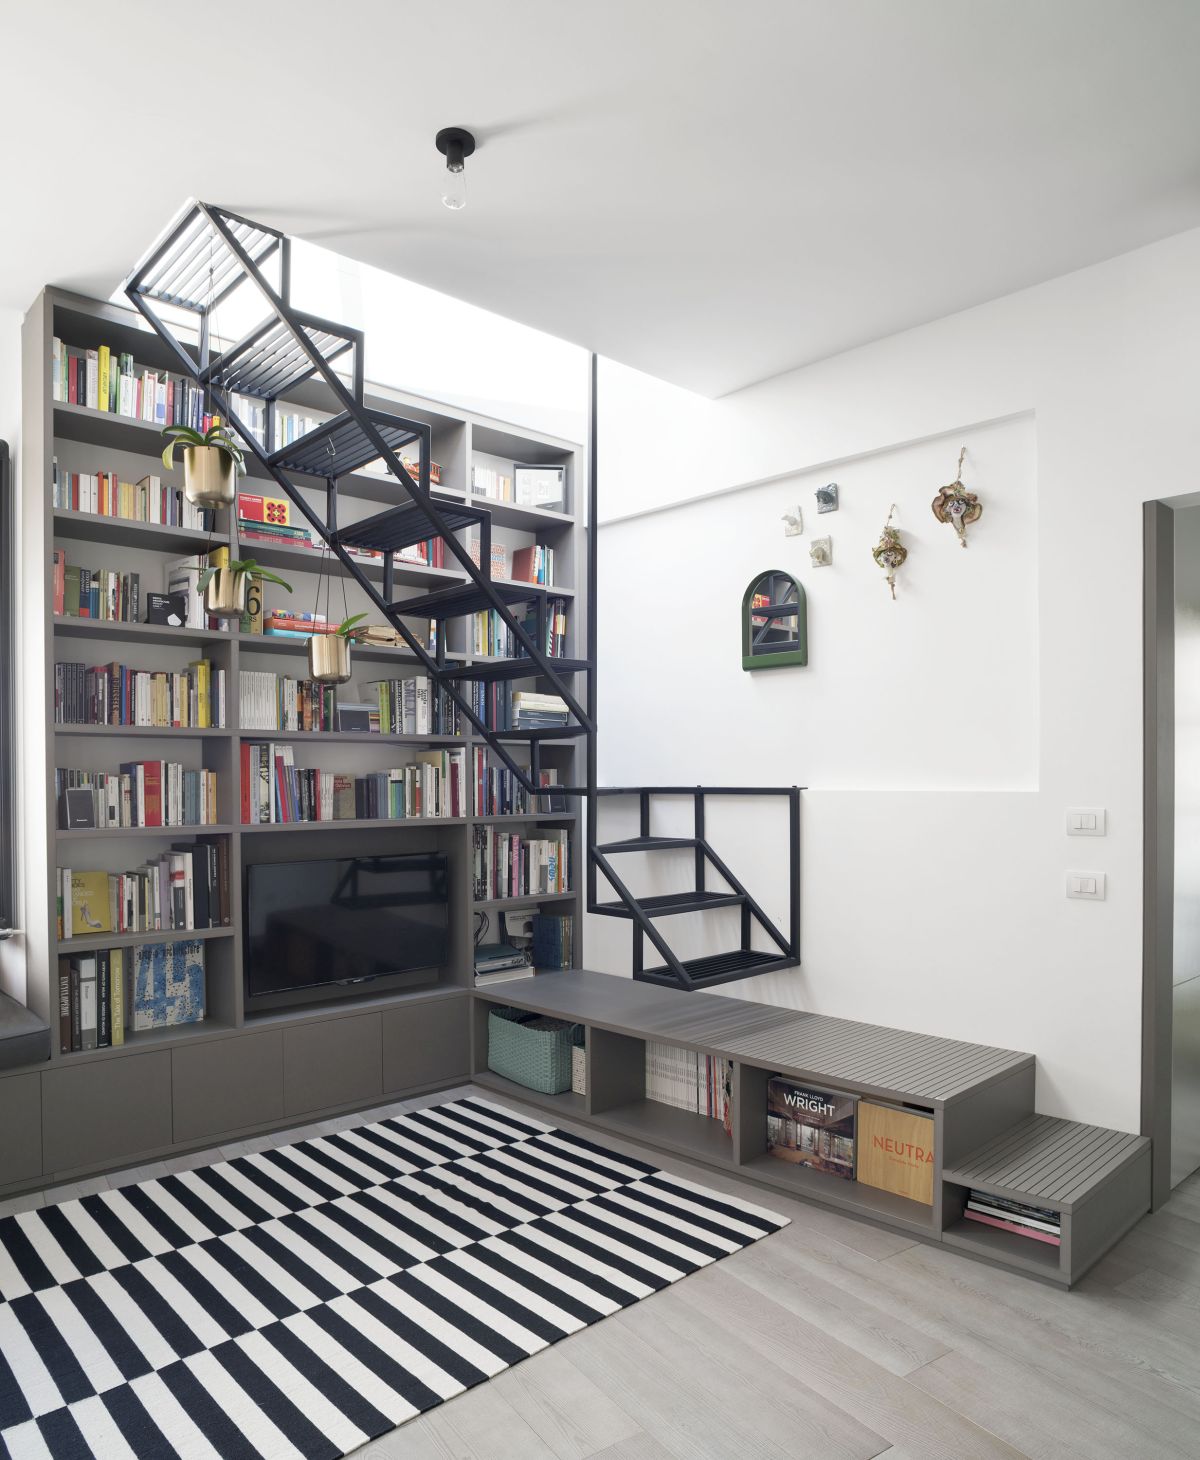 The stairs are integrated into the furniture is a surprisingly seamless manner